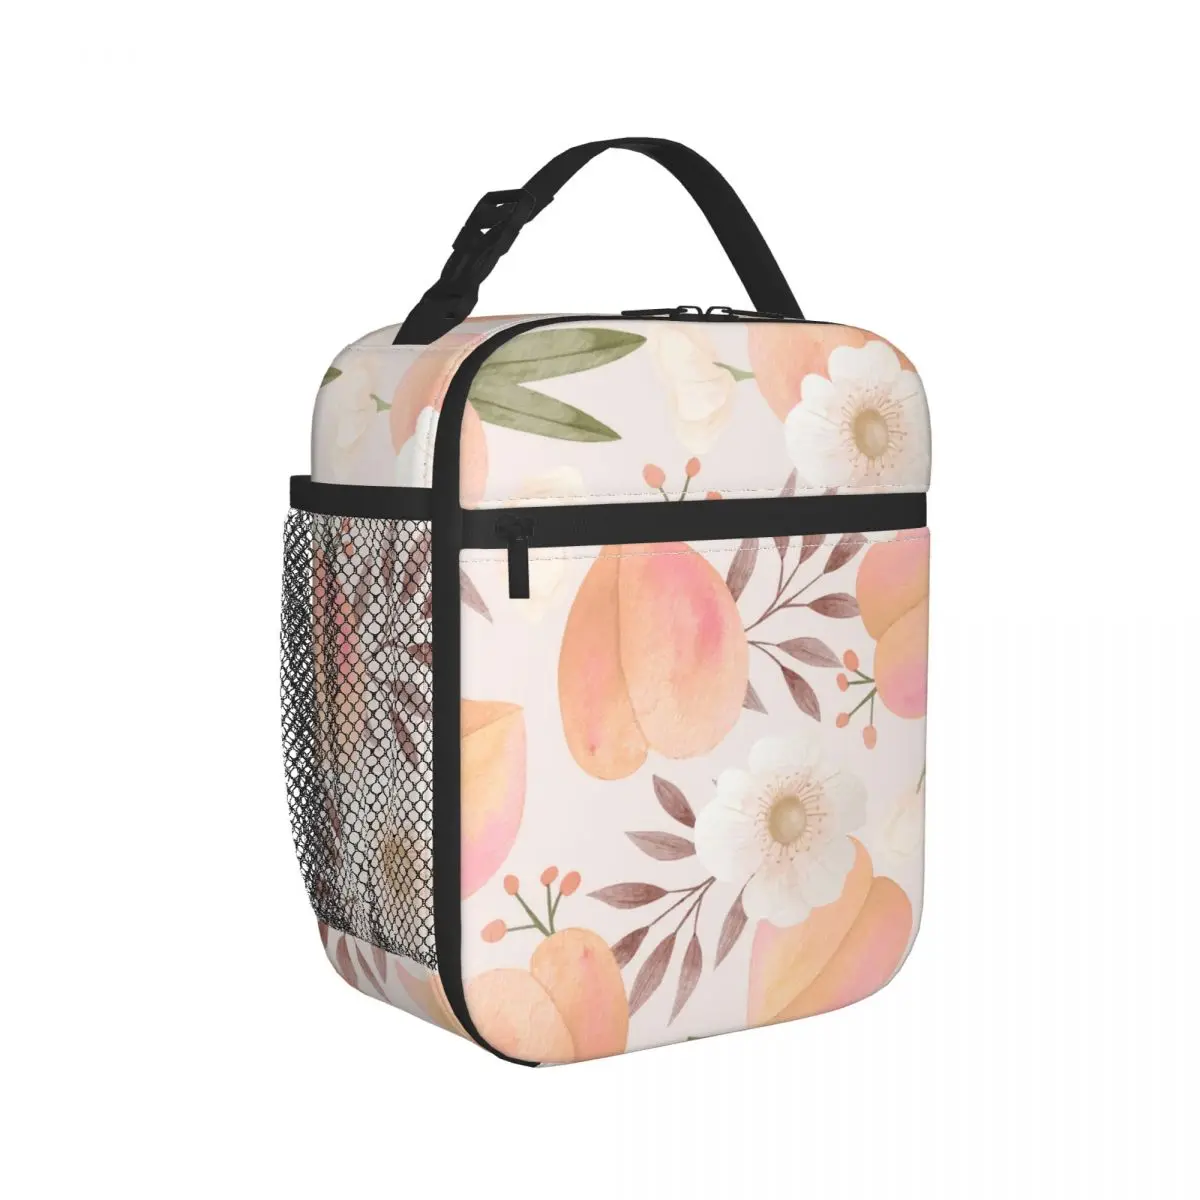 

Cooler Lunch Bag Watercolor Peach Insulated Thermal Food Picnic Handbag Portable Shoulder Lunch Box Tote